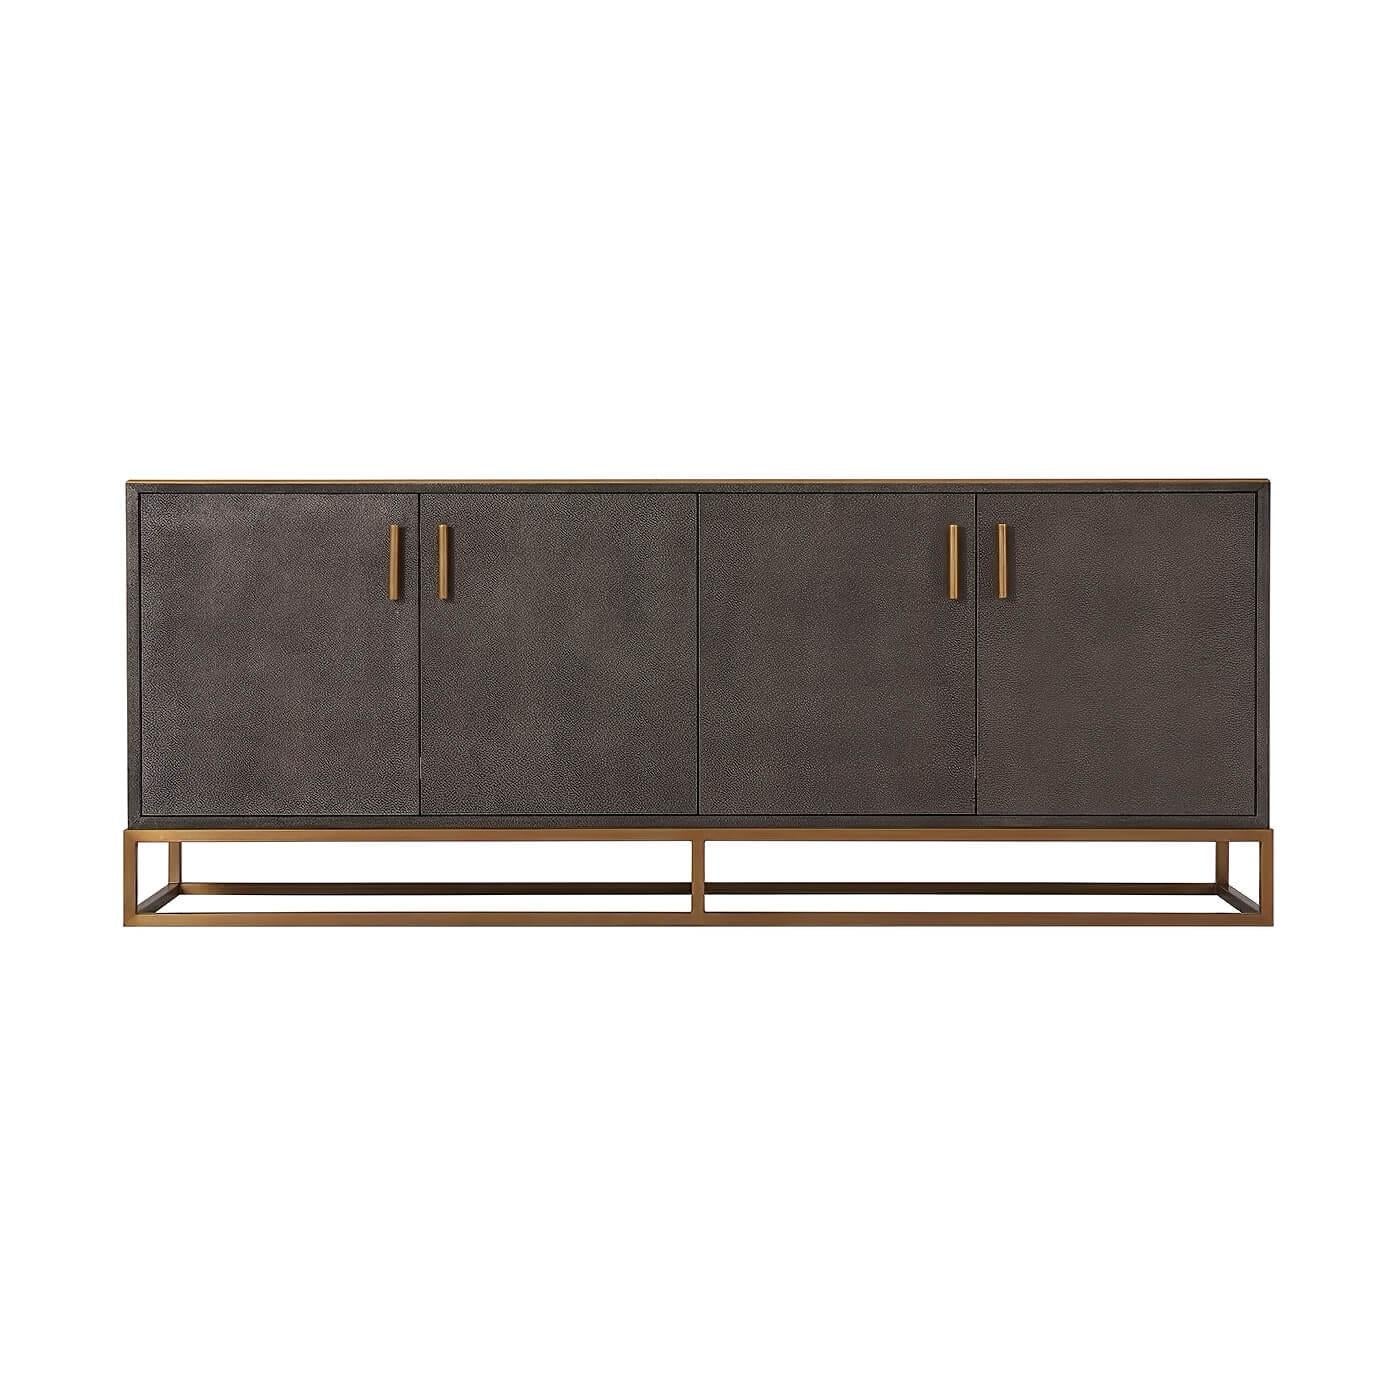 Modern leather wrapped media console A shagreen embossed leather wrapped cabinet in grey tempest finish with four cabinet doors enclosing shelves on a brass open cube base with polished nickel molding and handles.

Dimensions: 70.75